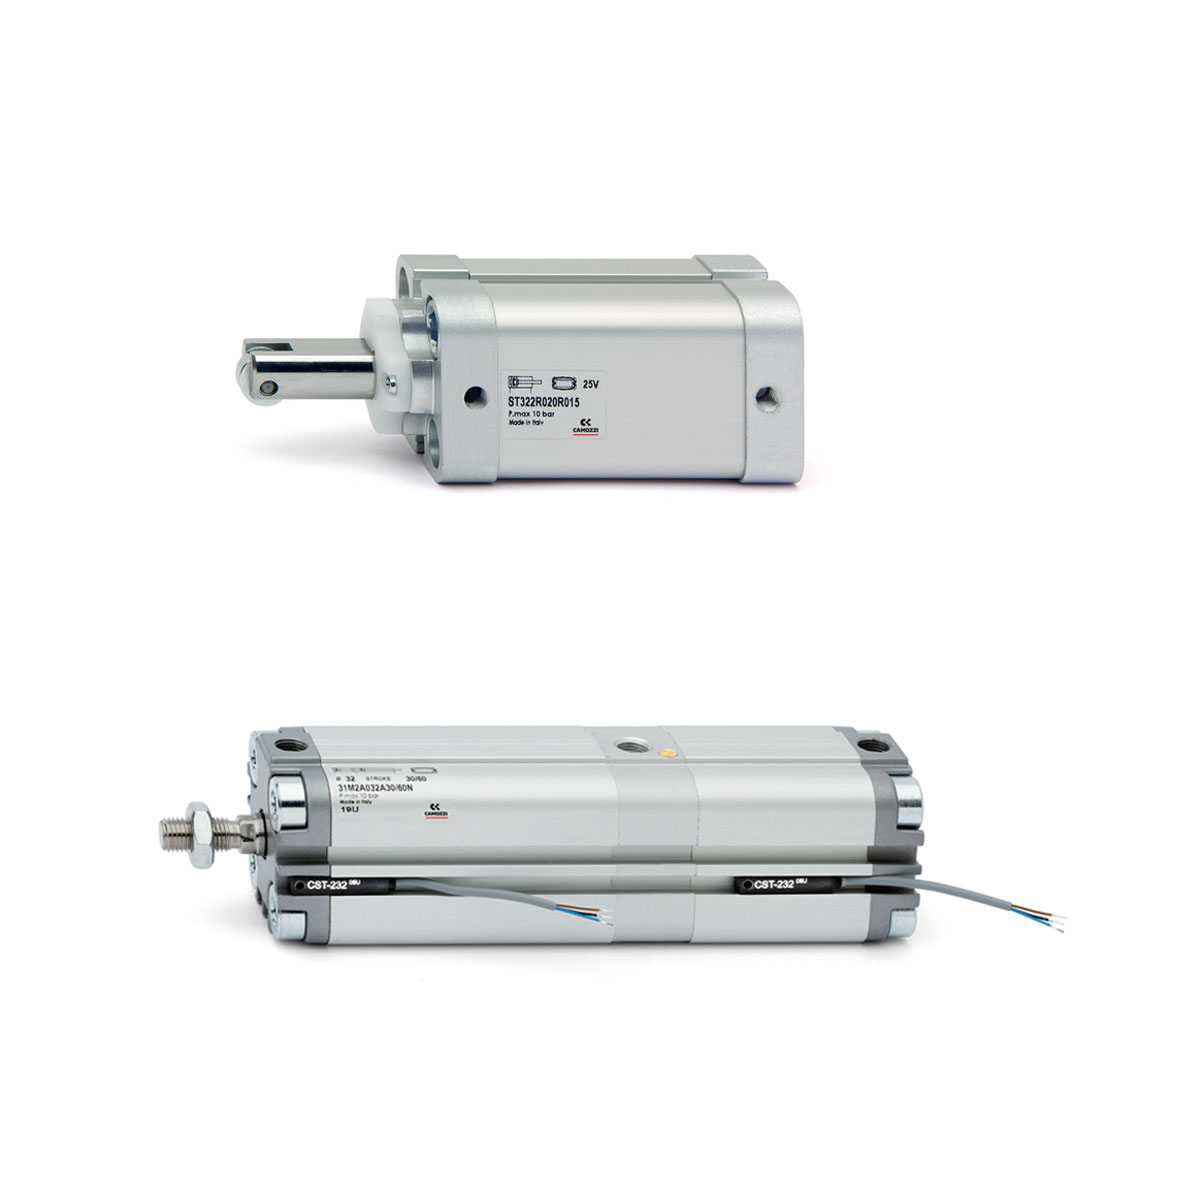 Compact cylinders